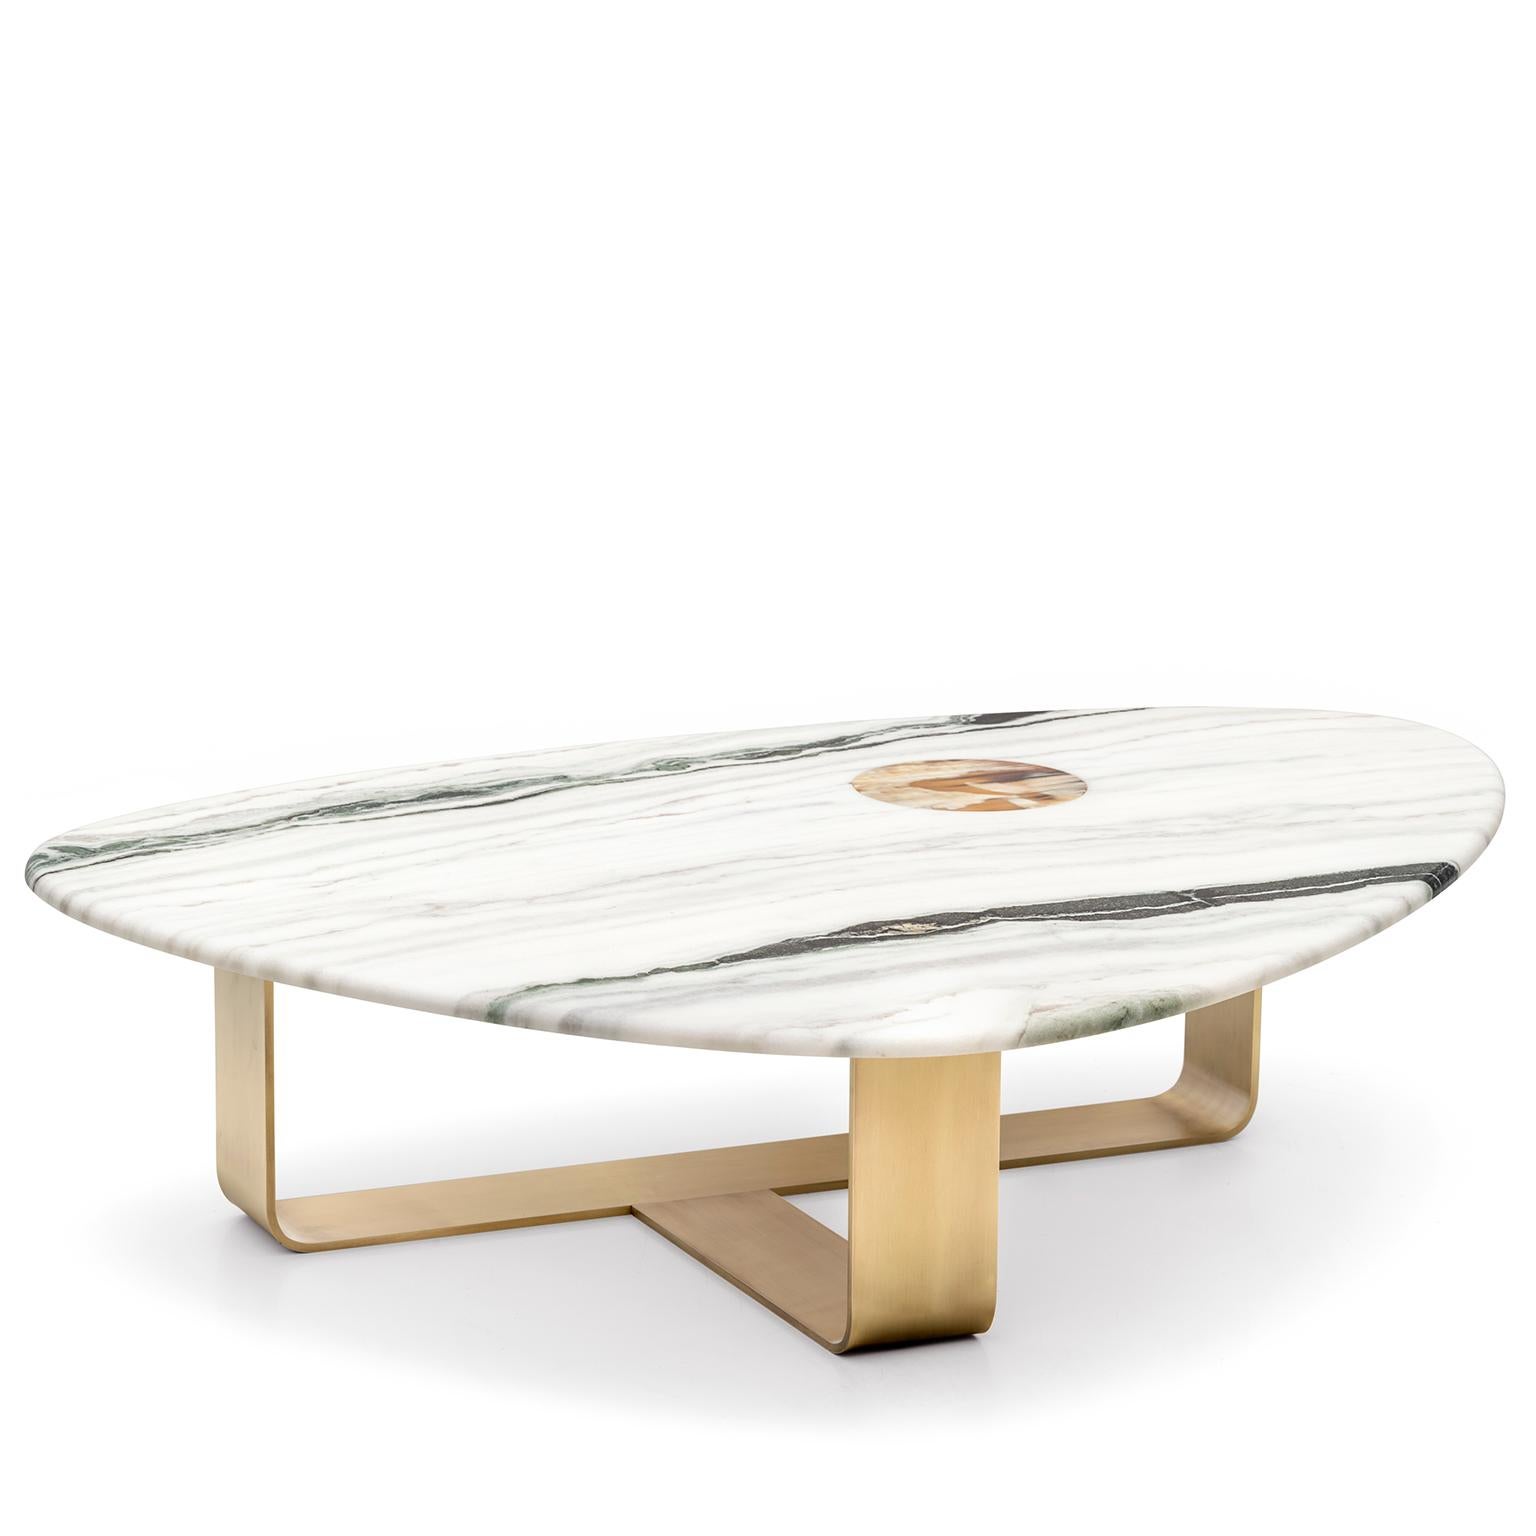 Artistic streak and craftsmanship excellence find their ultimate expression in our Demetra coffee table, an eye-catching marriage of solemn materials and flawless shapes. Resting atop an elegant structure in satin metal, this table sports a